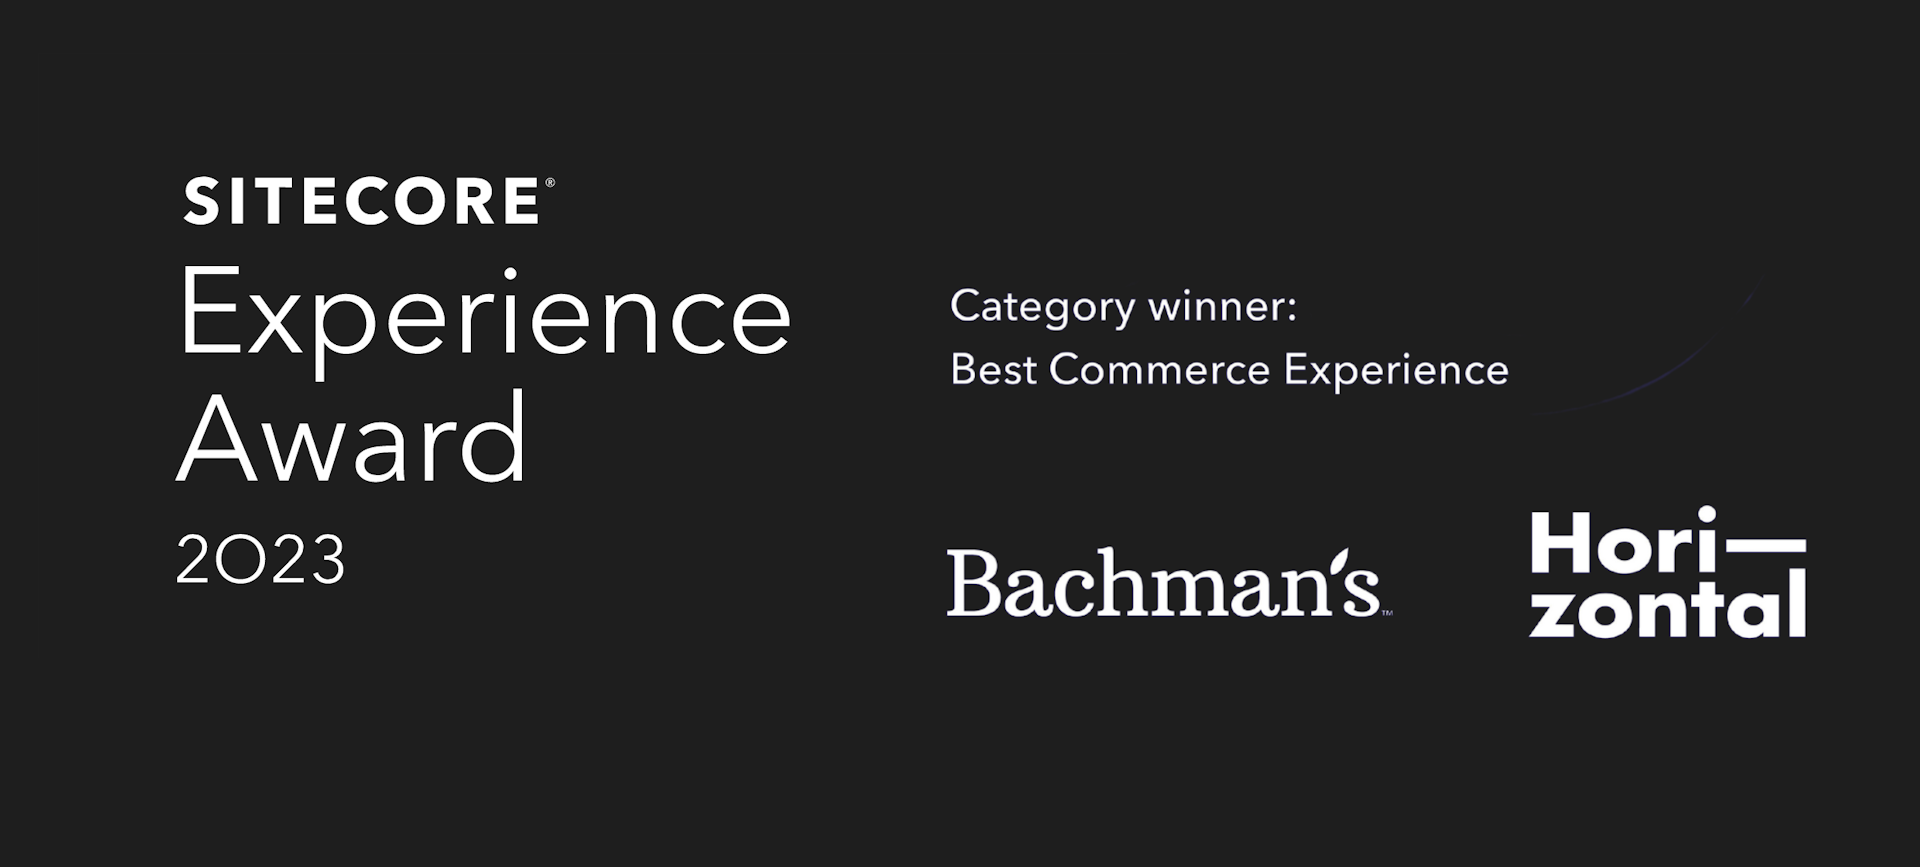 Horizontal Digital wins Sitecore Experience Award for Best Commerce Experience